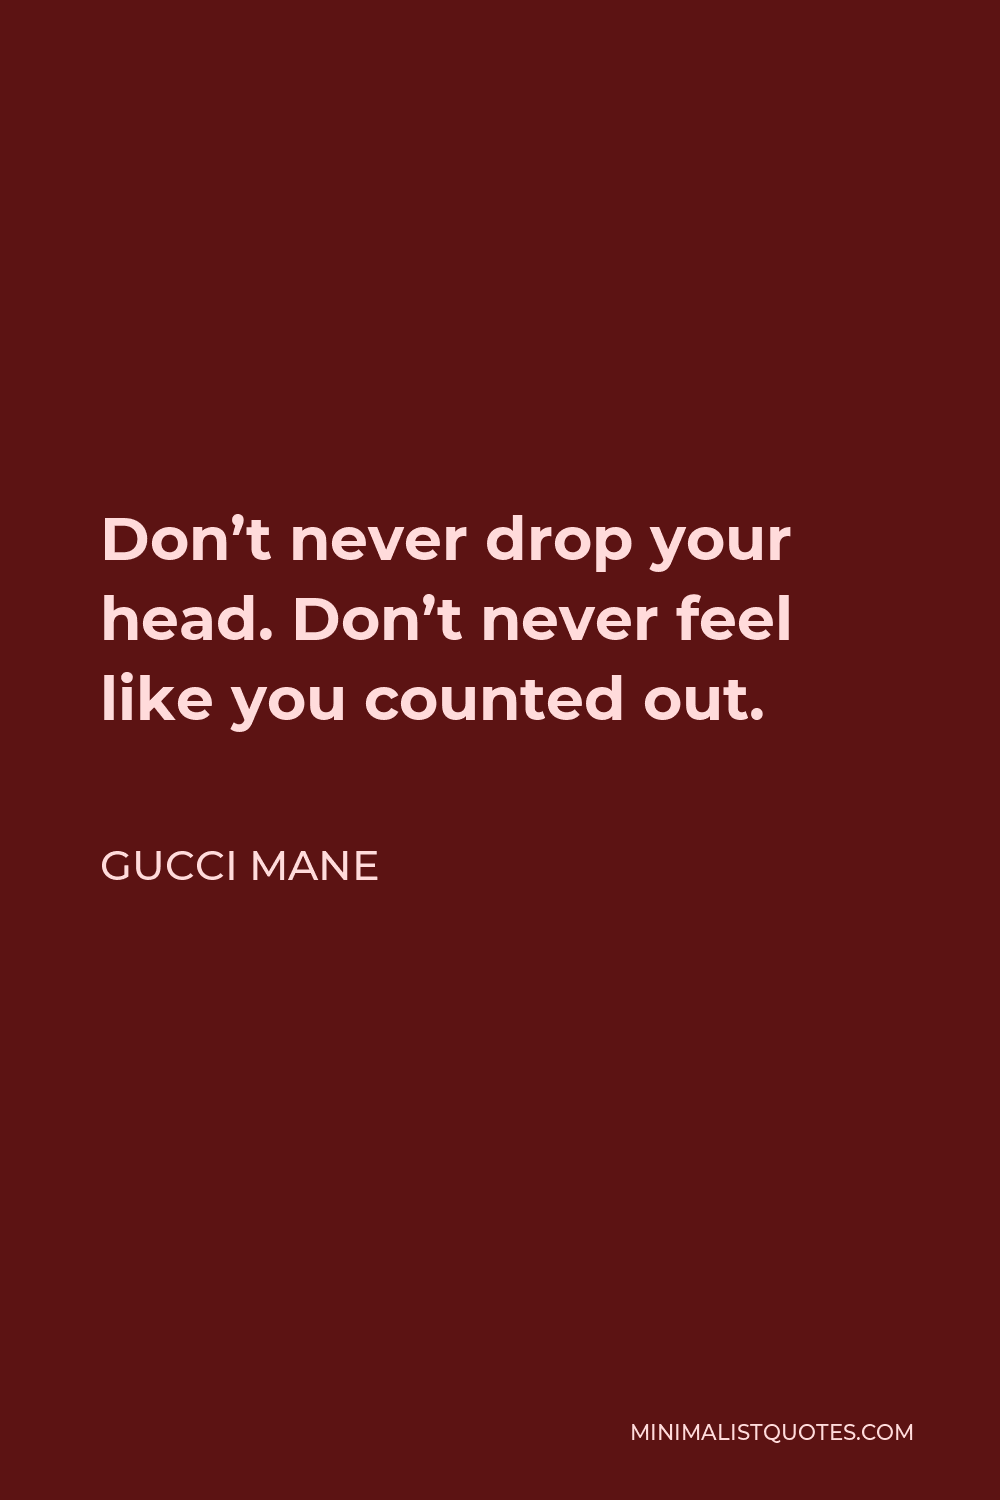 Gucci Mane Quote - Don’t never drop your head. Don’t never feel like you counted out.